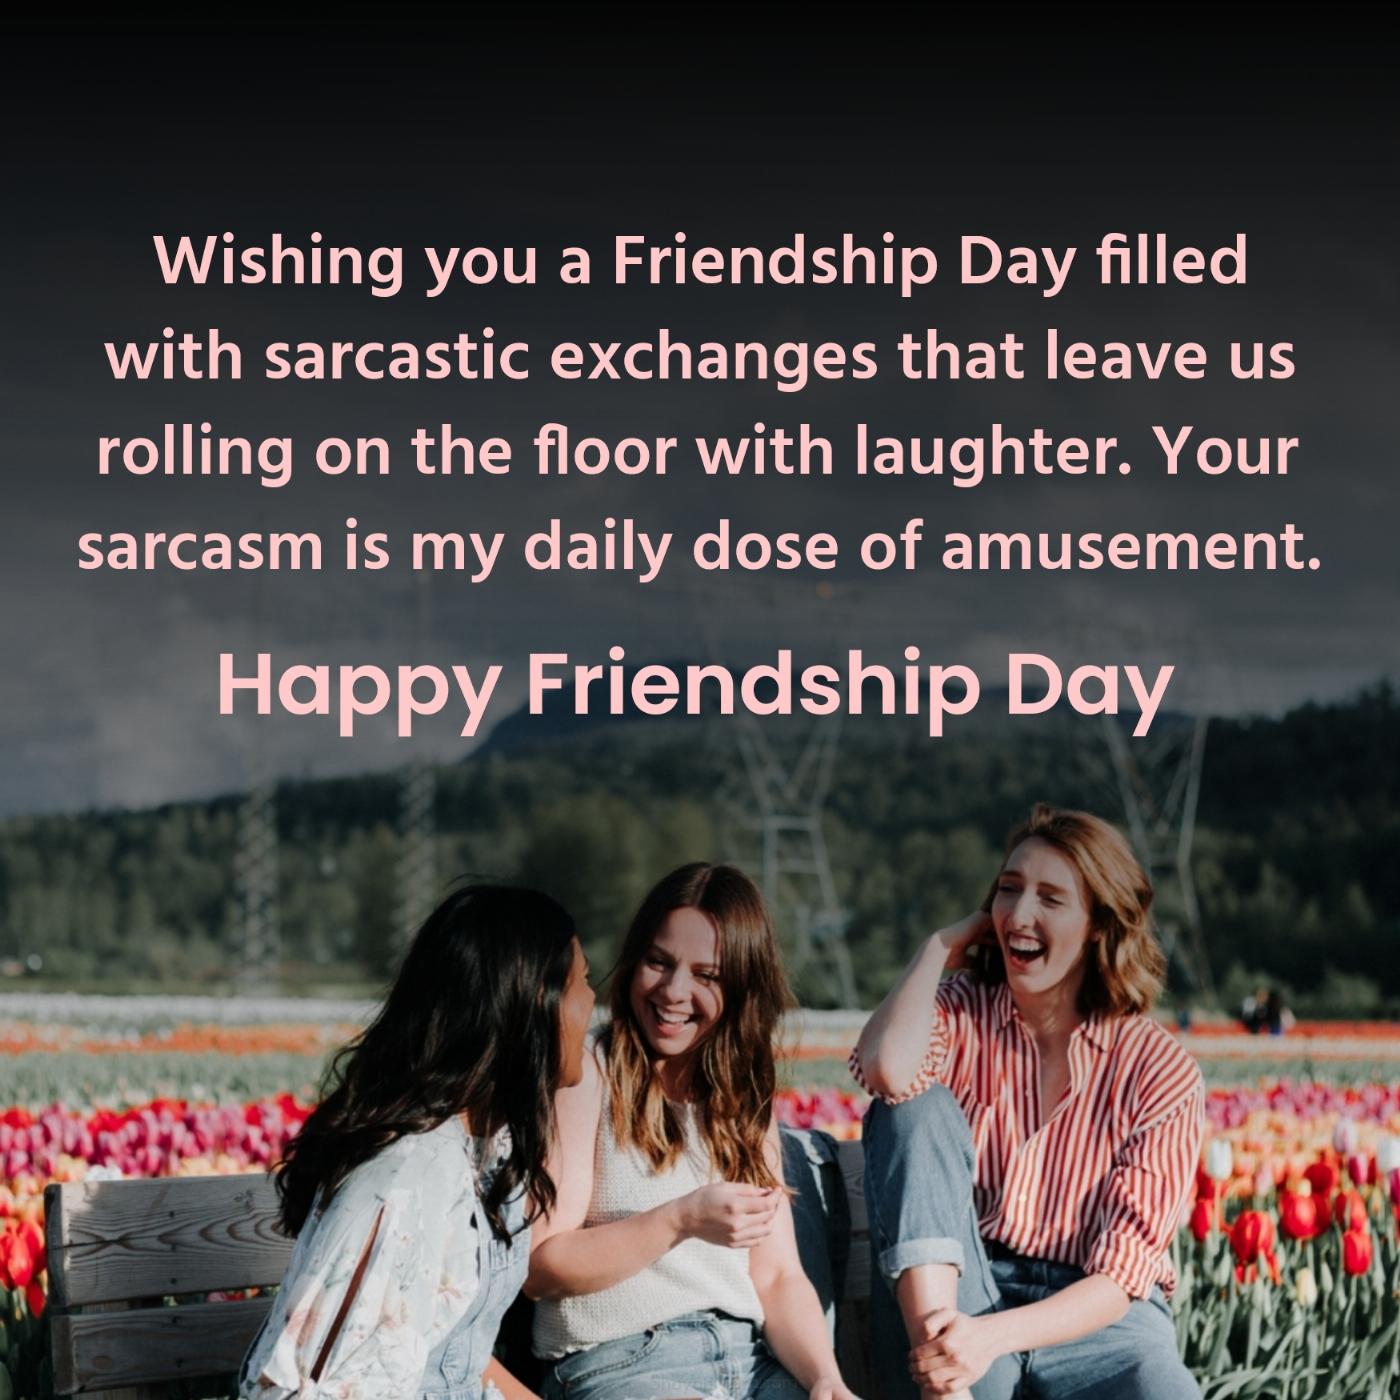 Wishing you a Friendship Day filled with sarcastic exchanges